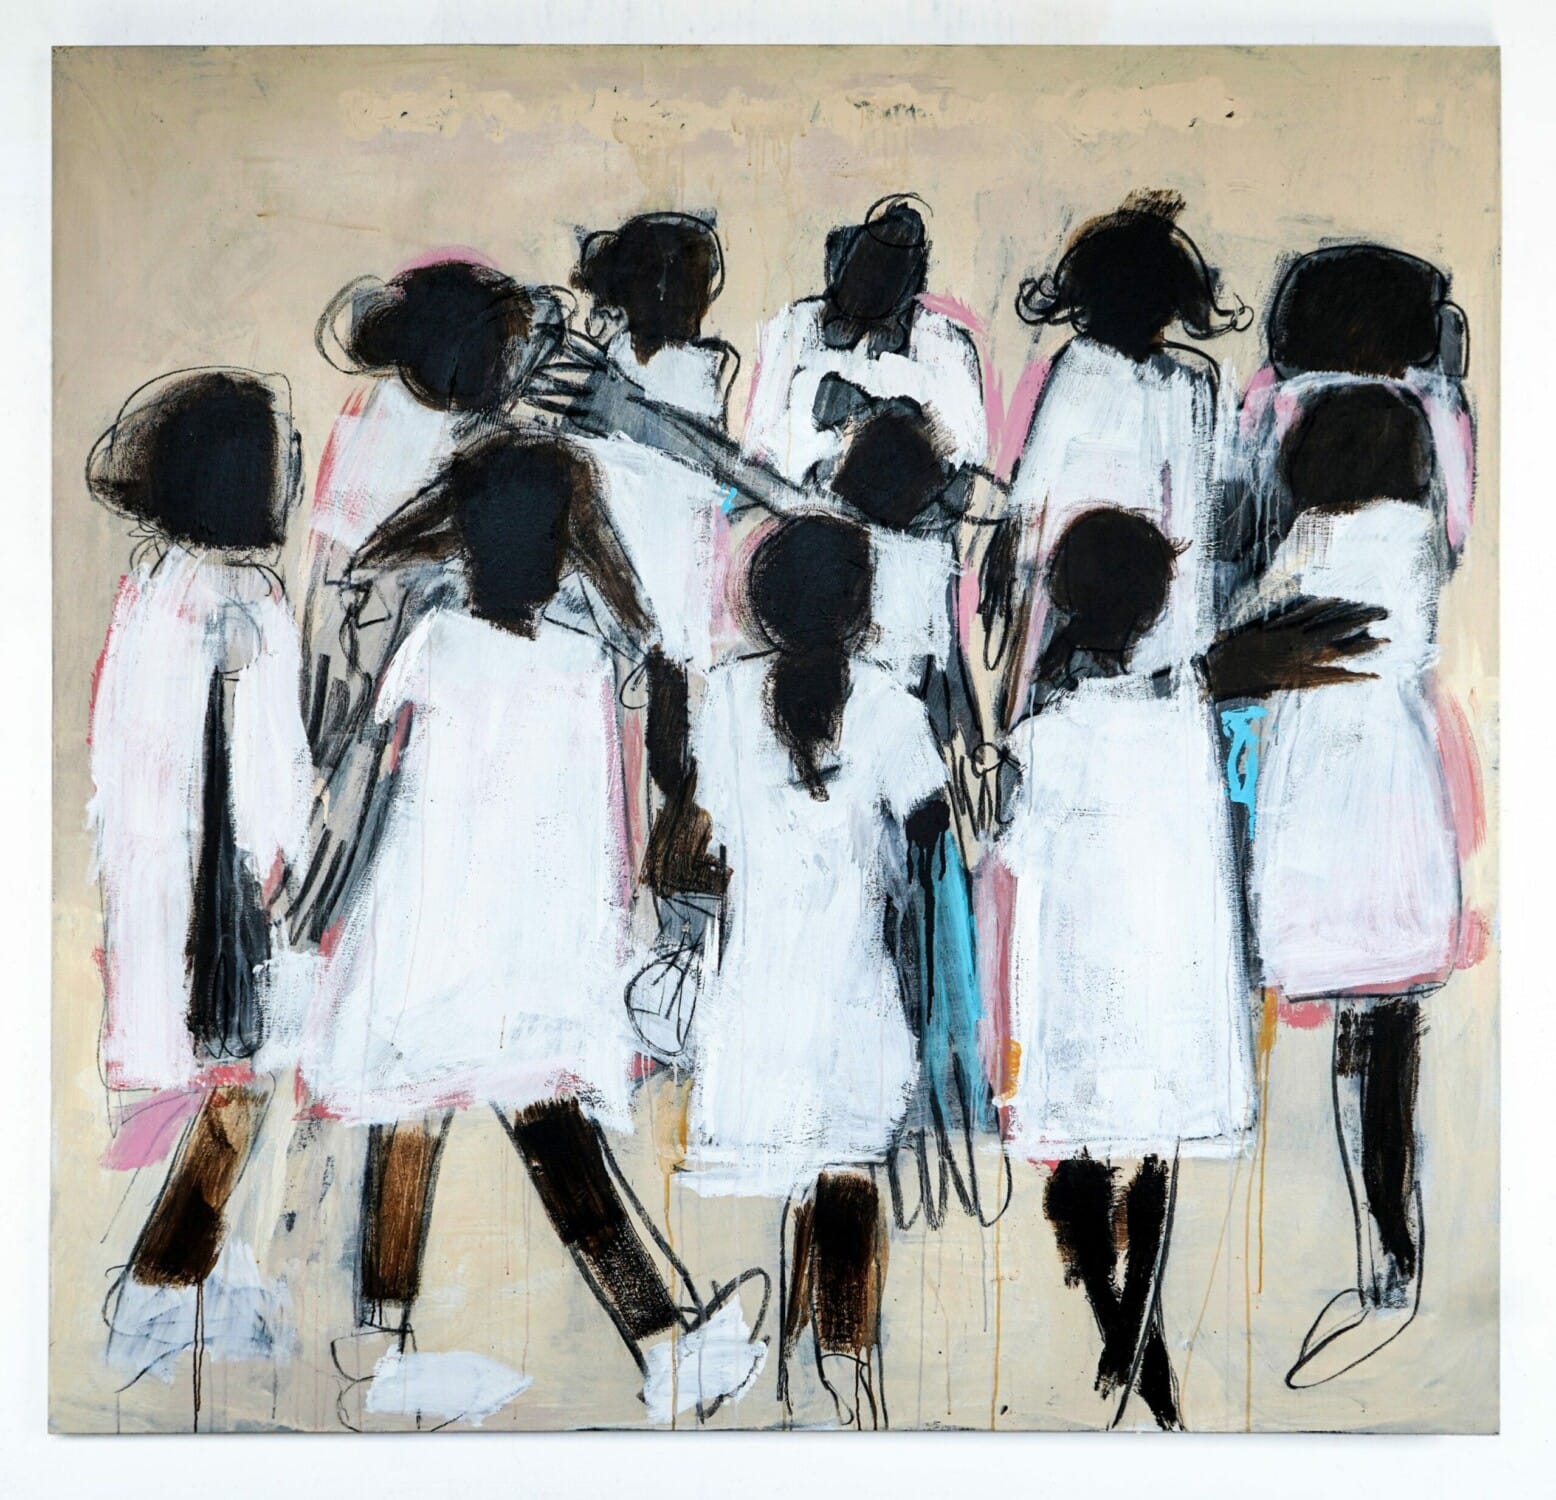 Giants, 2020, acrylic and charcoal on canvas, 78 x 77 in.